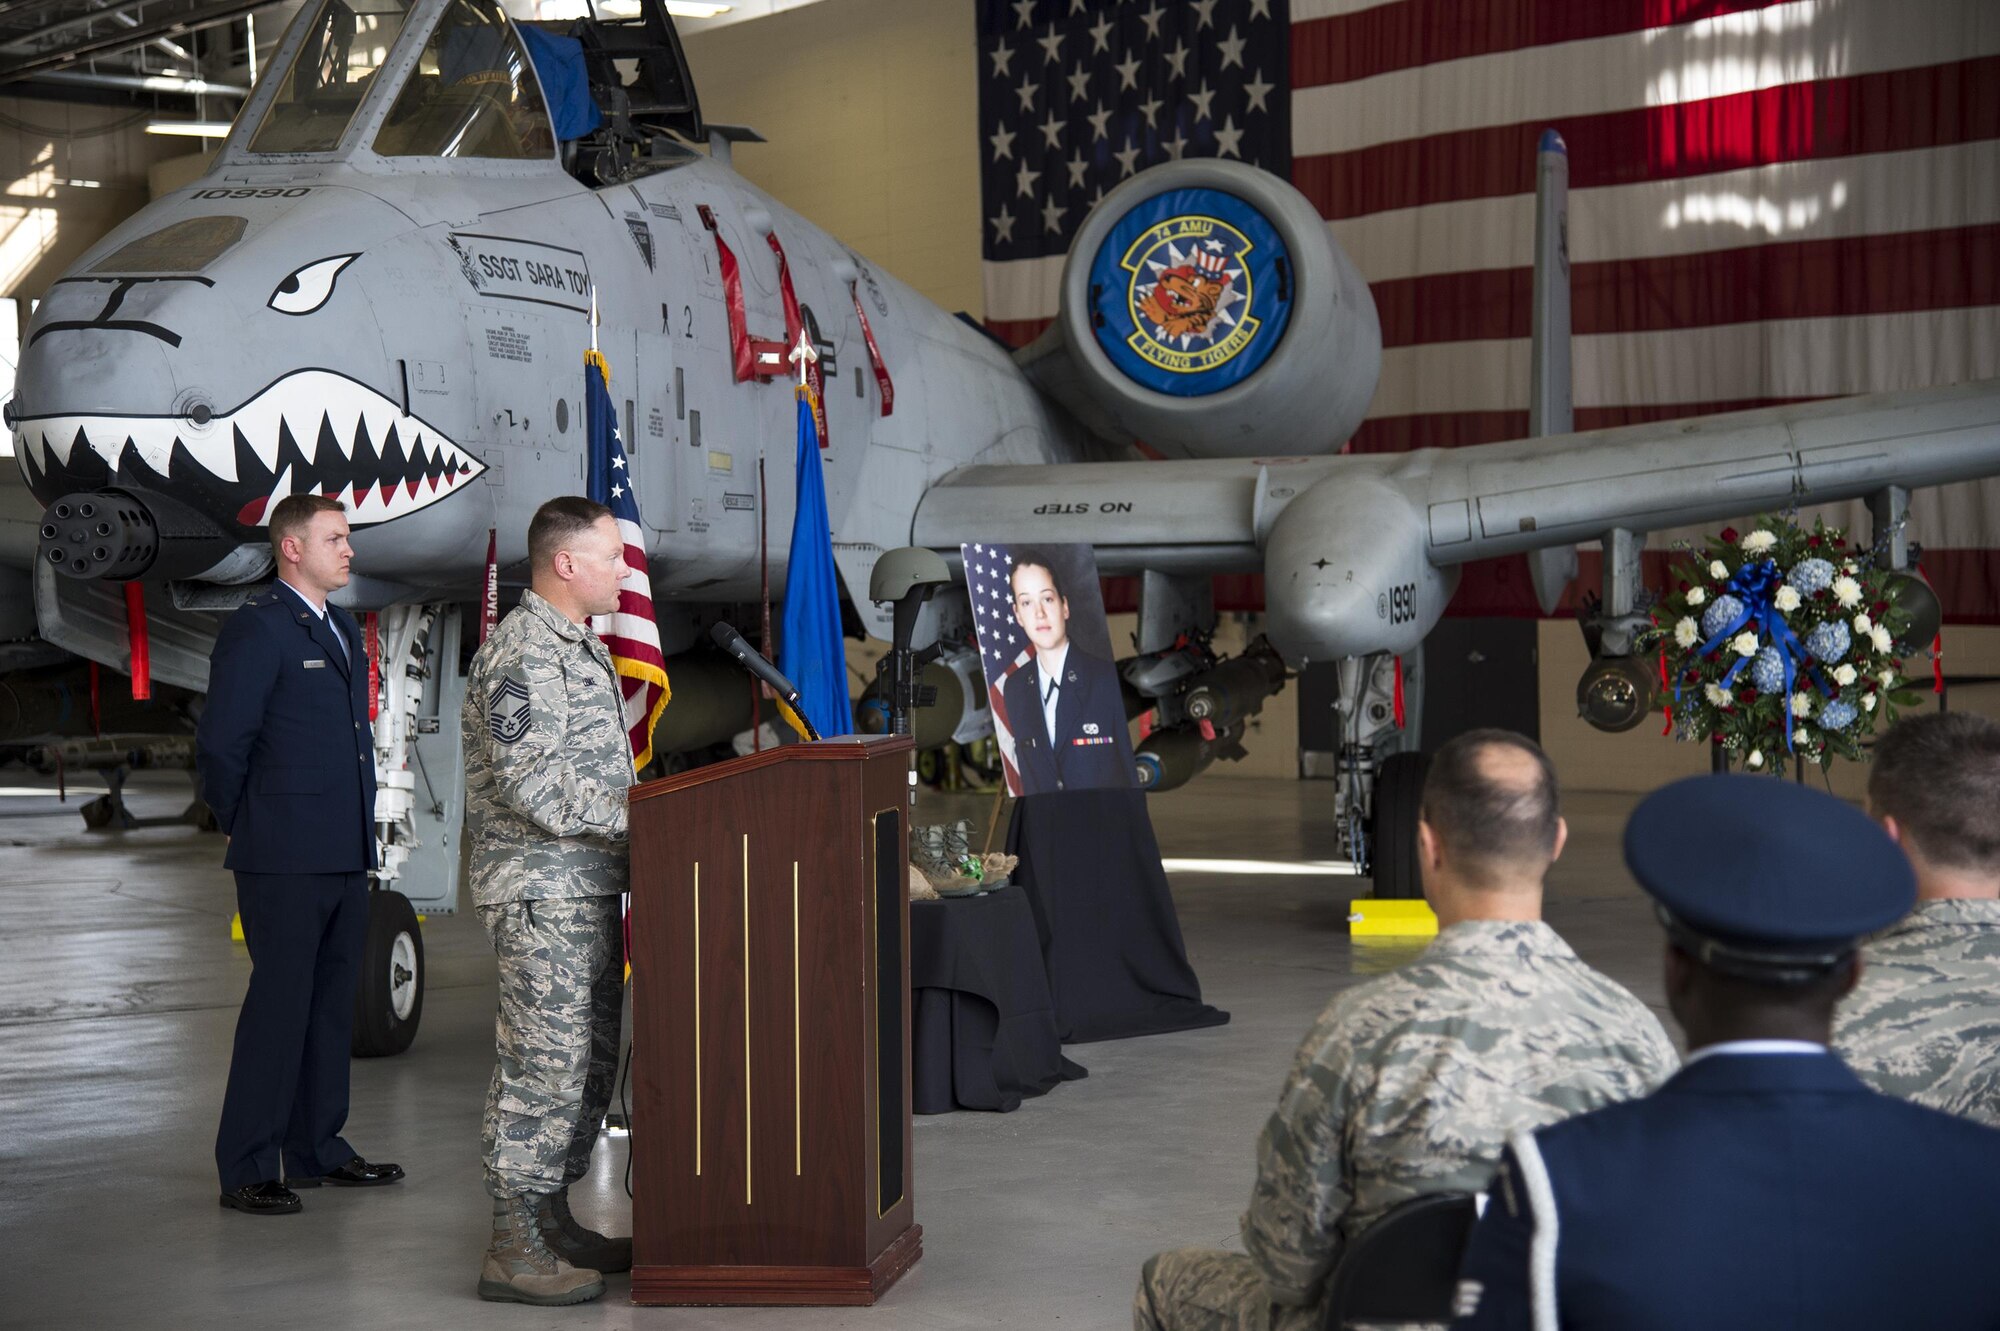 Chief Master Sgt. Mike Lemke, 23d Wing weapons manager, reflects on the memory of the late Staff Sgt. Sara Toy, 74th Aircraft Maintenance Unit weapons team chief, during a memorial ceremony, March 1, 2017, at Moody Air Force Base, Ga. Toy, a New Kent, Virginia native, died in a car accident Feb. 25, 2017. During the ceremony, she was remembered as a valuable member of the Team Moody weapons community and was posthumously awarded the Air Force Commendation Medal and the rank of Staff Sergeant. (U.S. Air Force photo by Andrea Jenkins/Released)